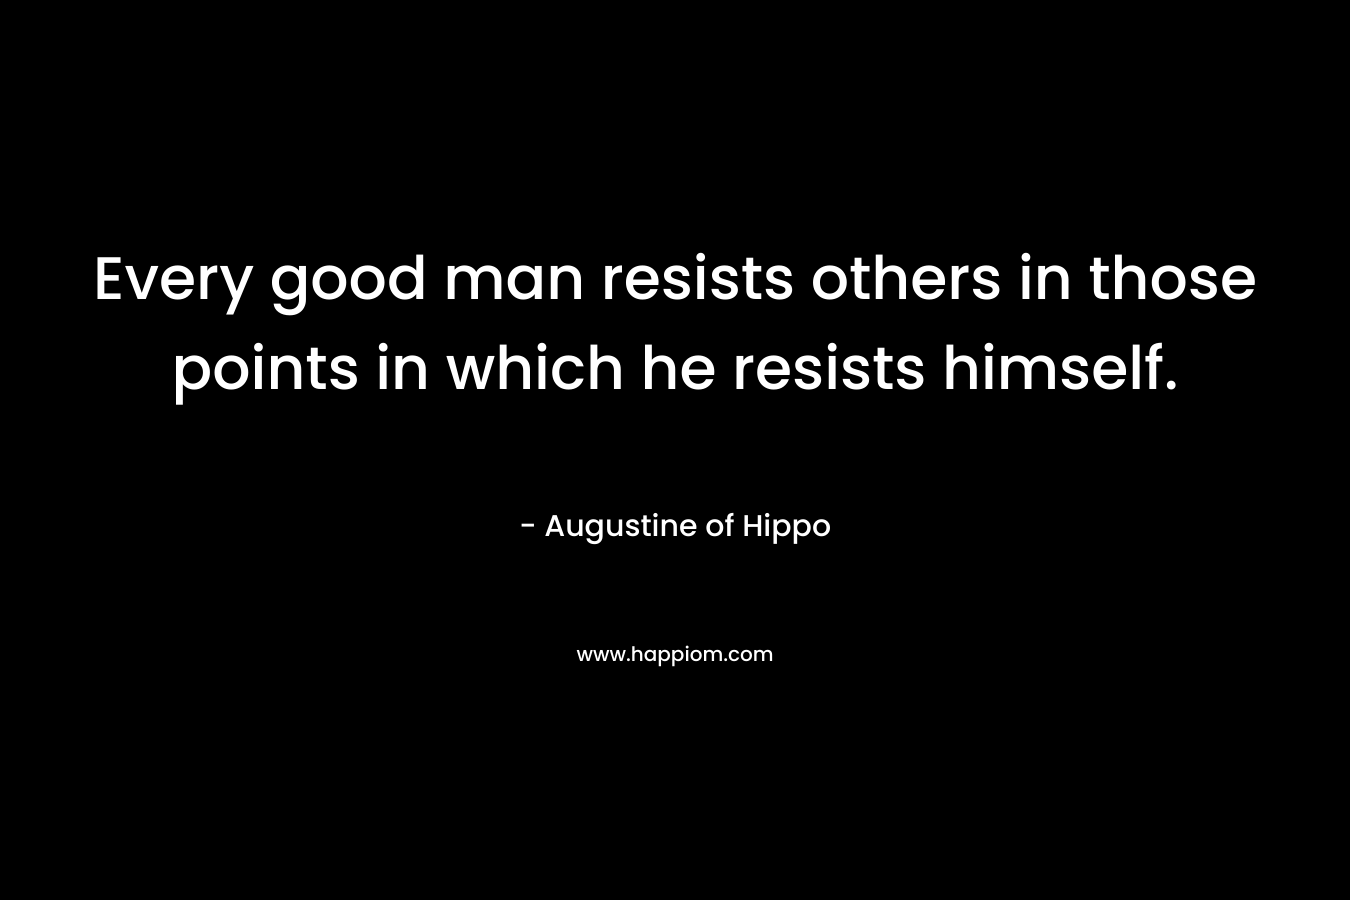 Every good man resists others in those points in which he resists himself.